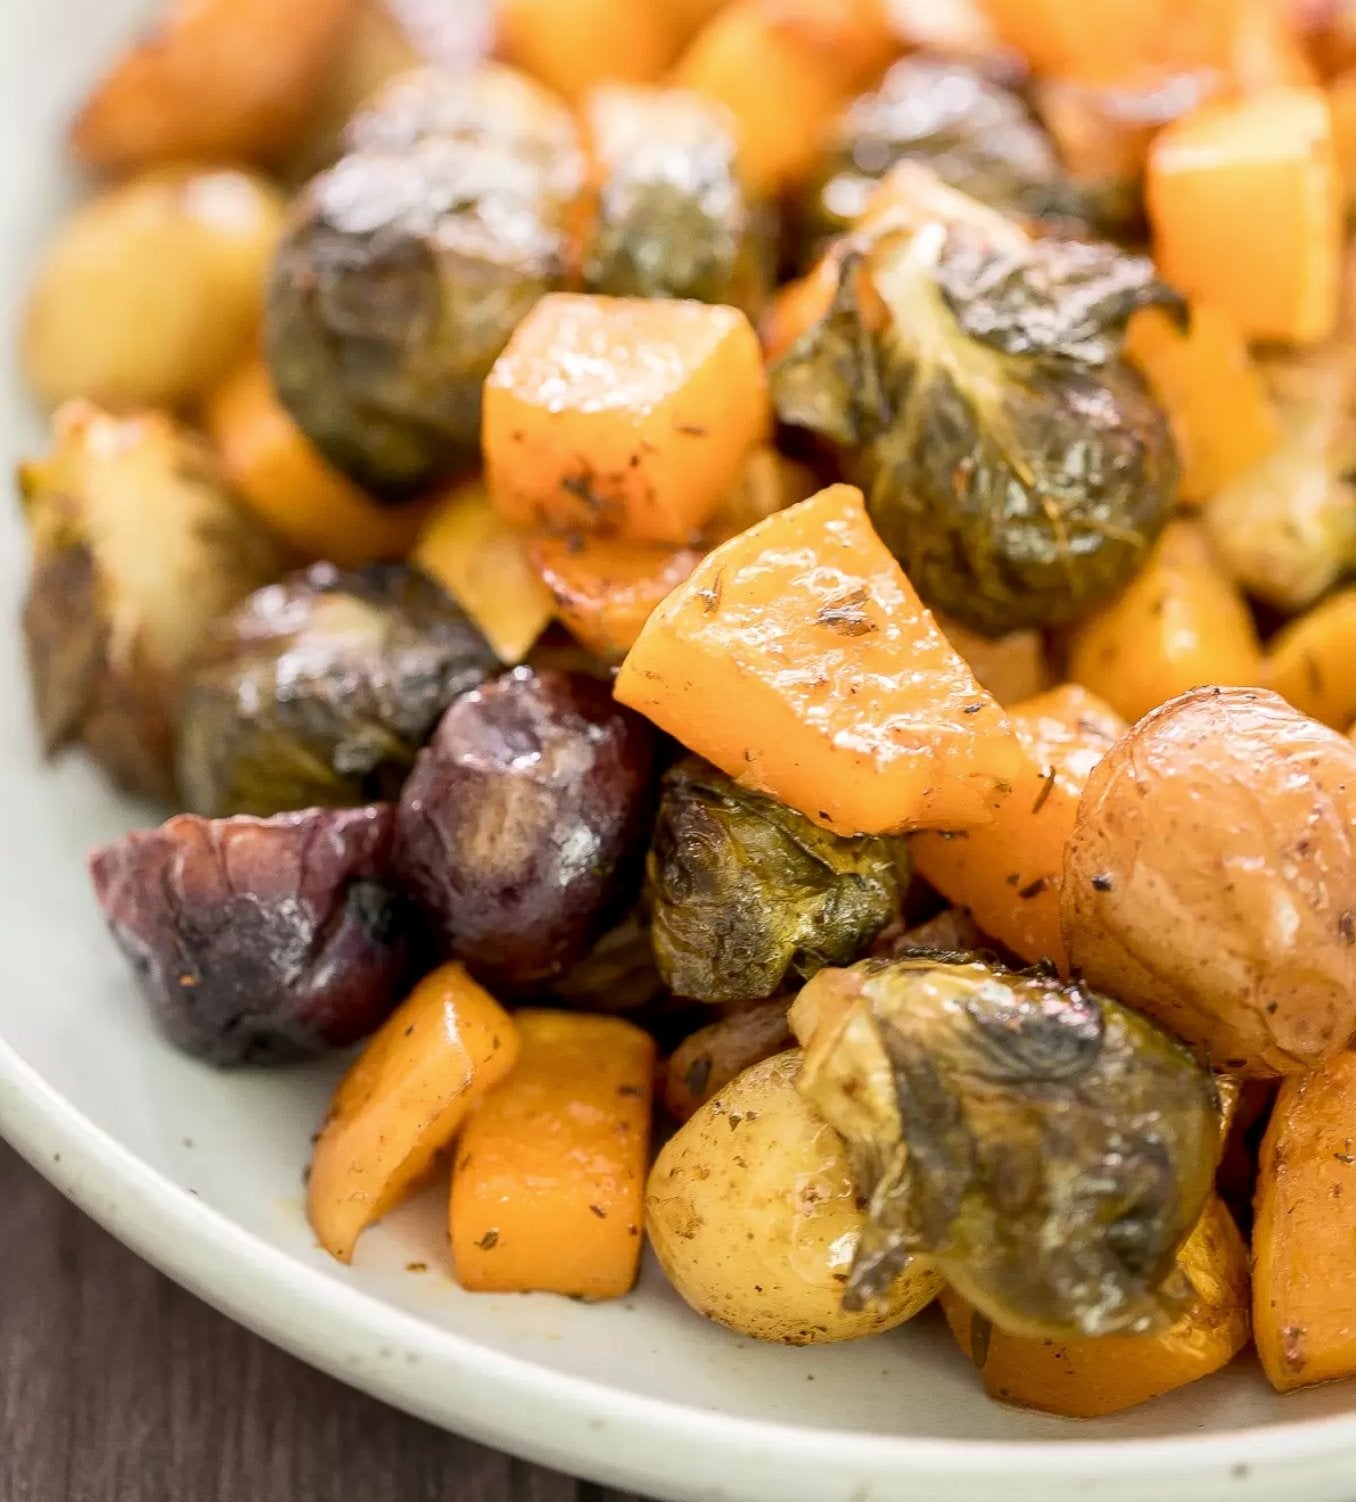 ROASTED HARVEST VEGETABLES WITH BUTTERNUT SQUASH - The Spice Guy